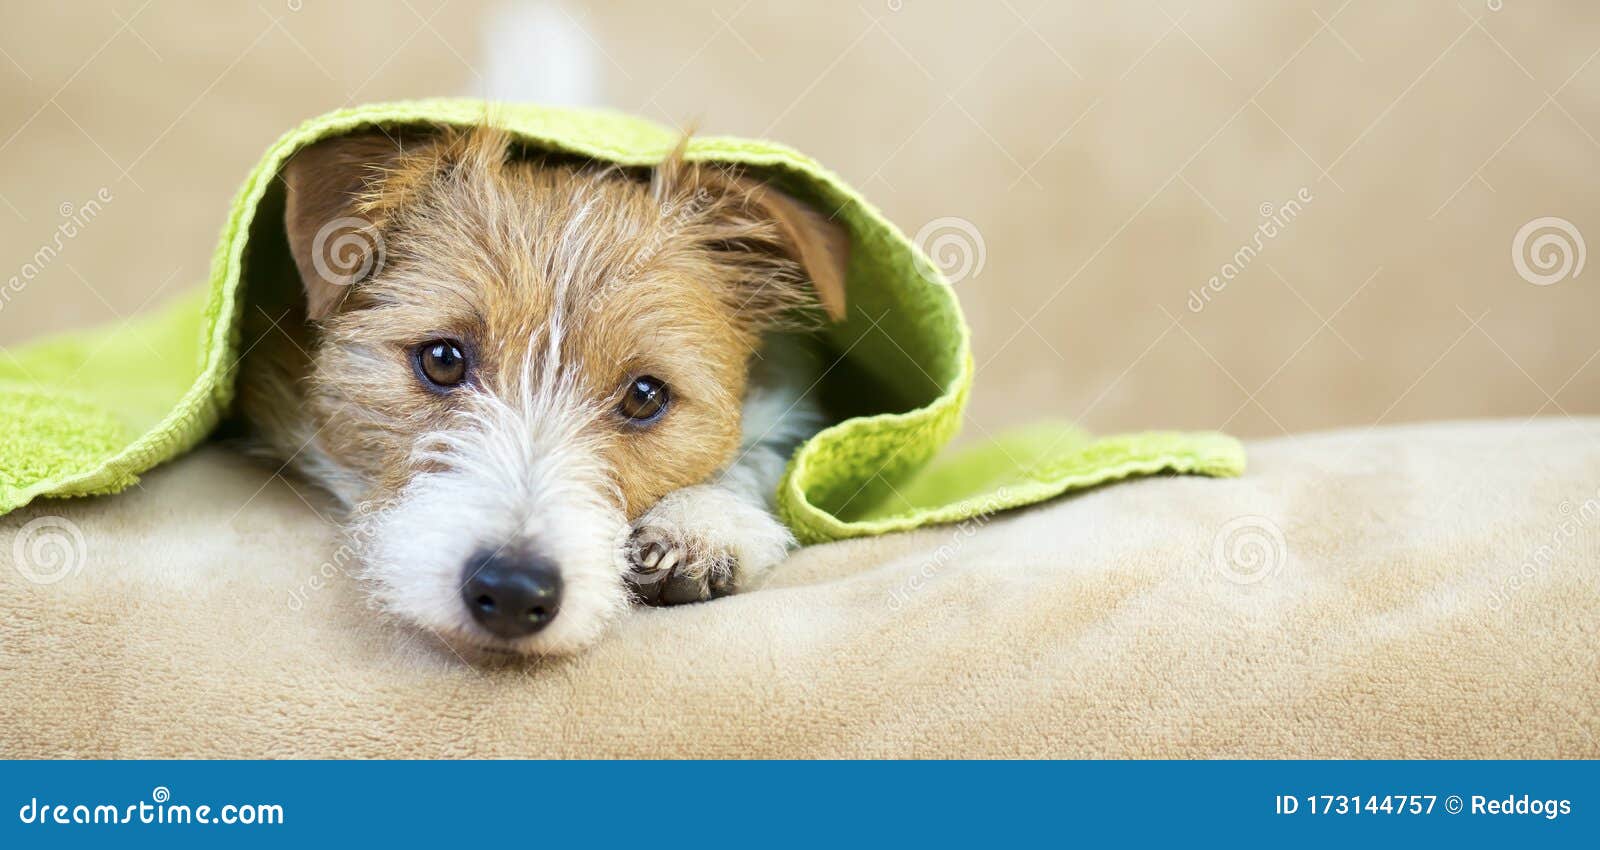 pet grooming concept, web banner of a furry happy dog puppy with towel